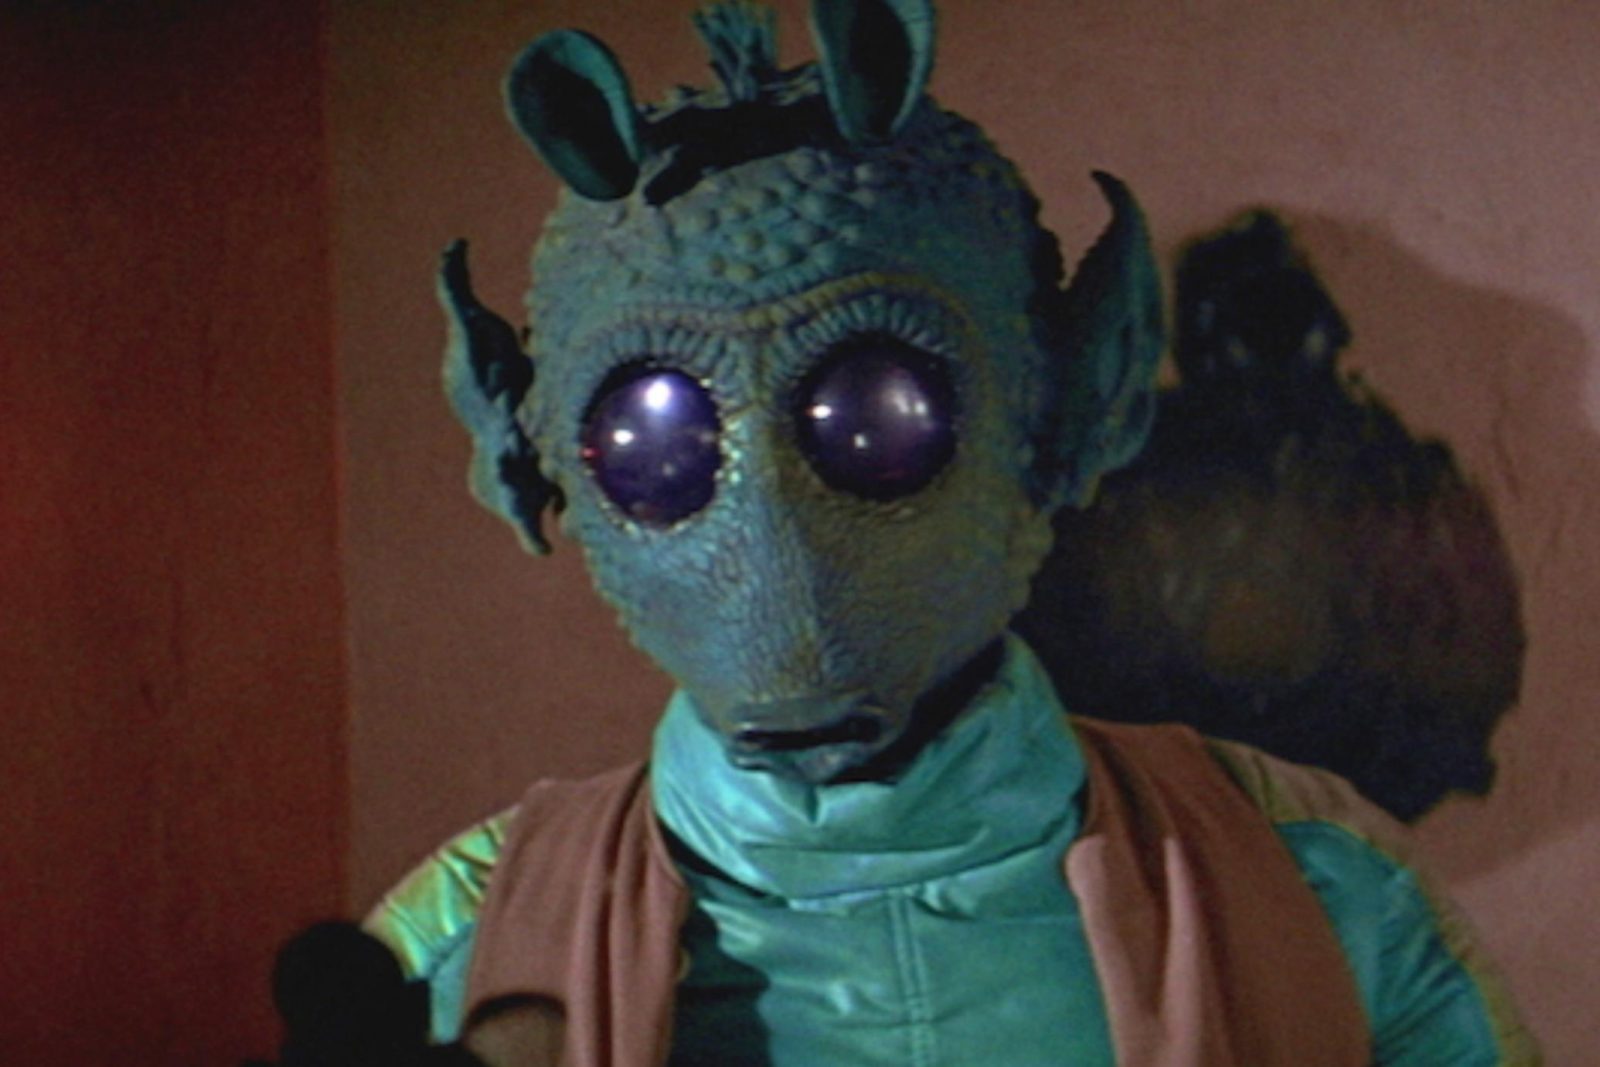 Do You Know a Little Bit About Everything: “Star Wars” Edition Greedo Reg